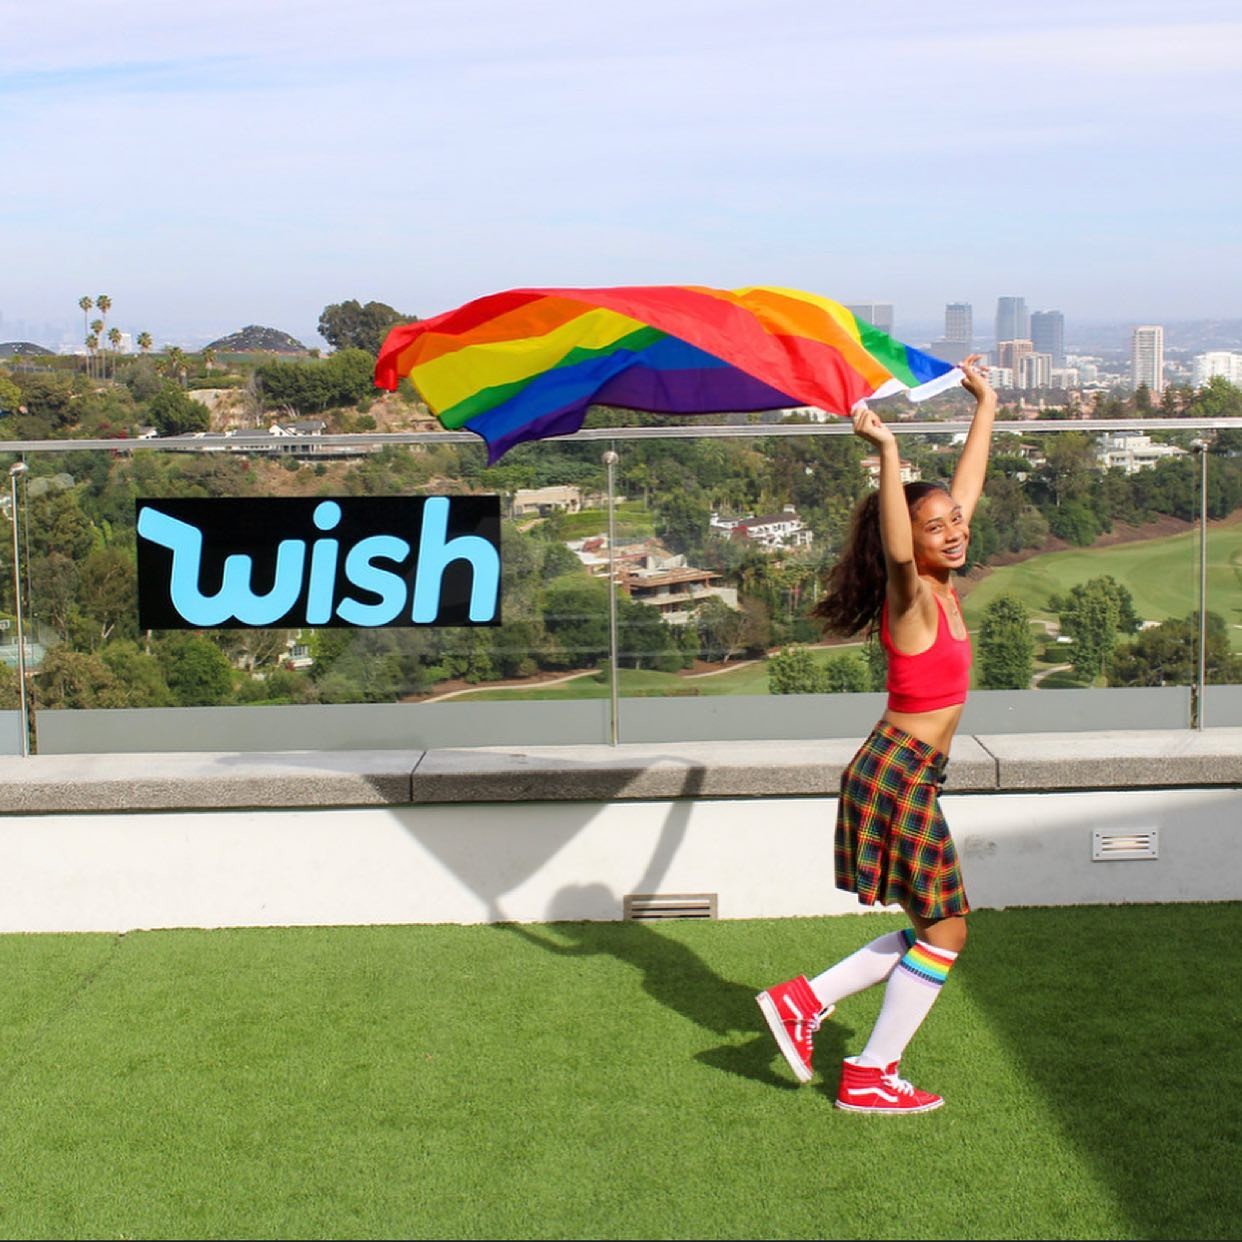 About wish